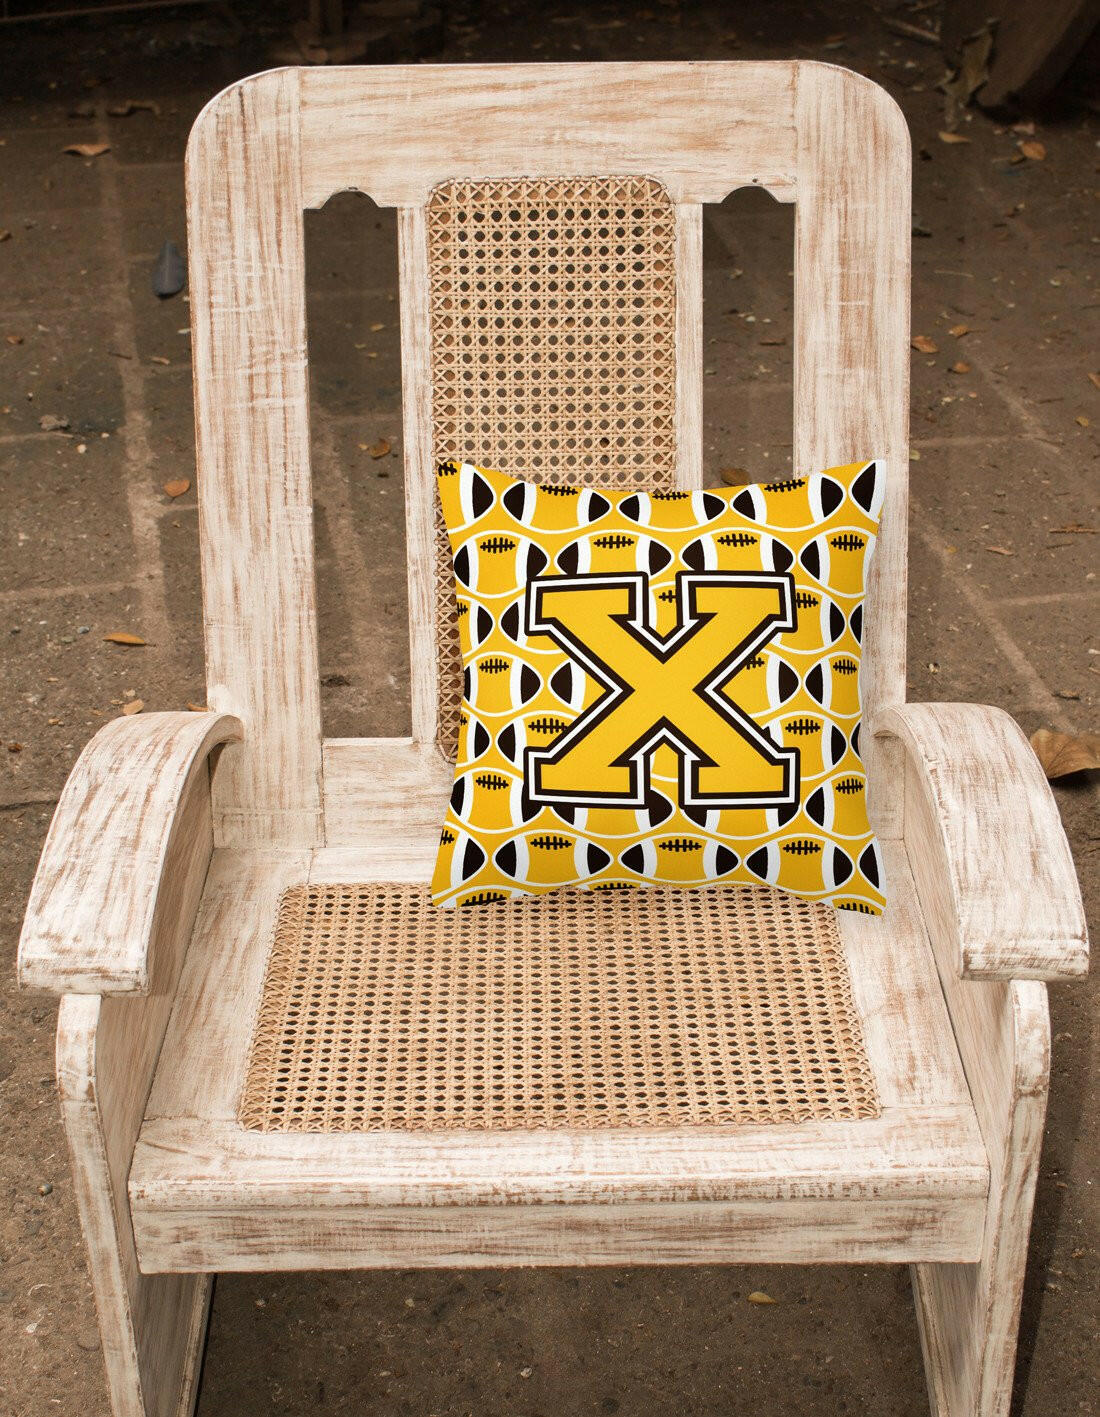 Letter X Football Black, Old Gold and White Fabric Decorative Pillow CJ1080-XPW1414 by Caroline's Treasures